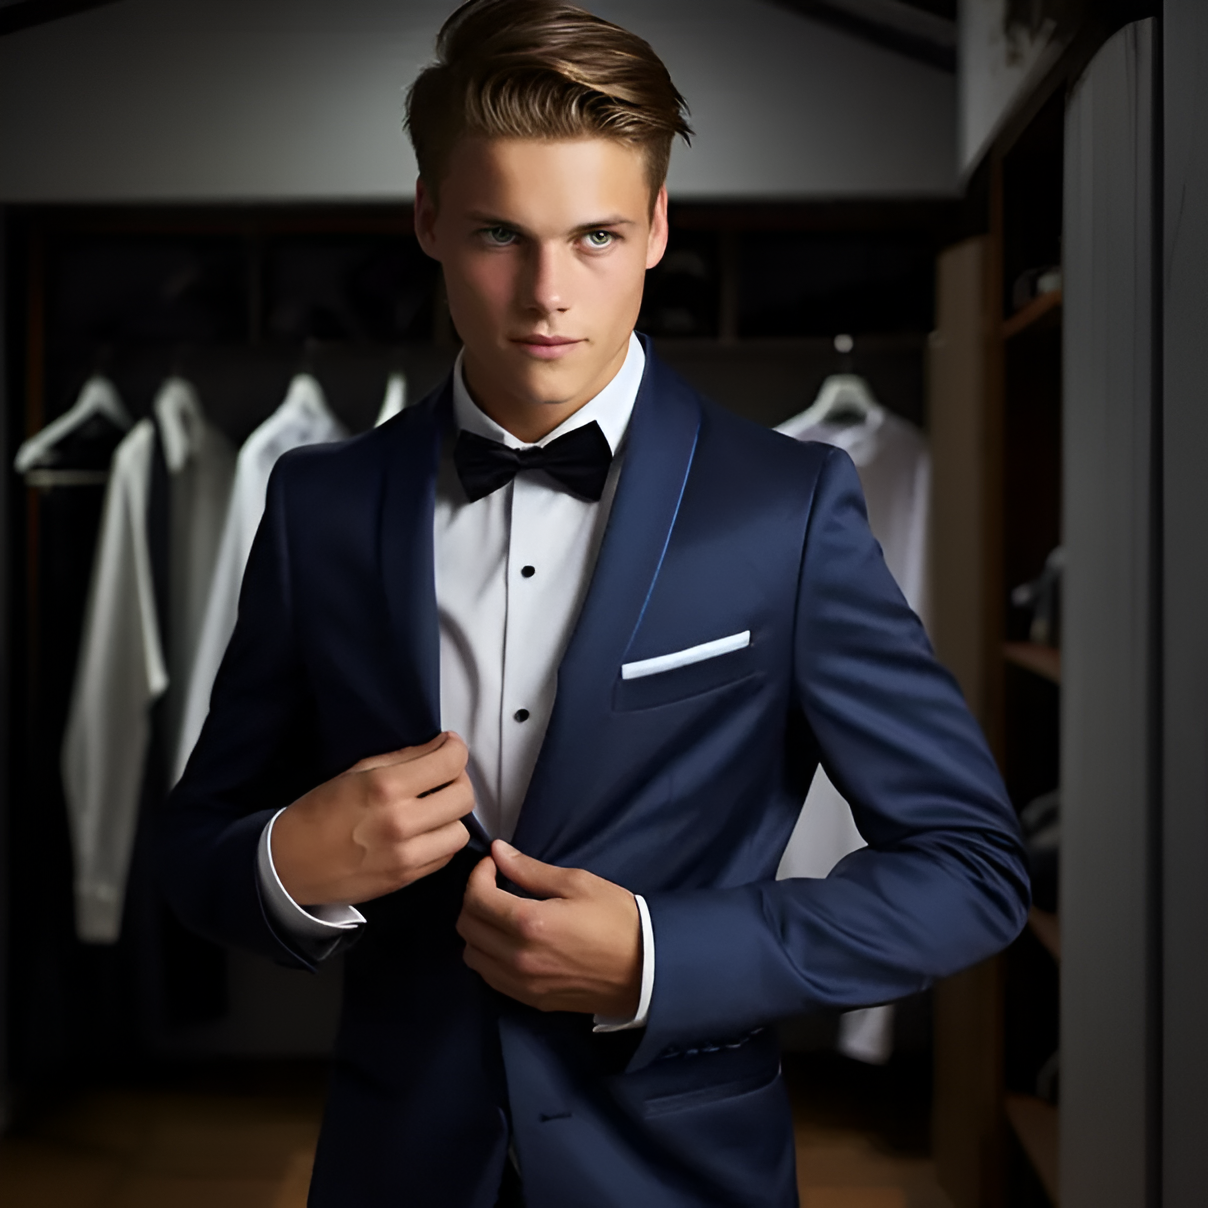 A young man wearing a prom suit